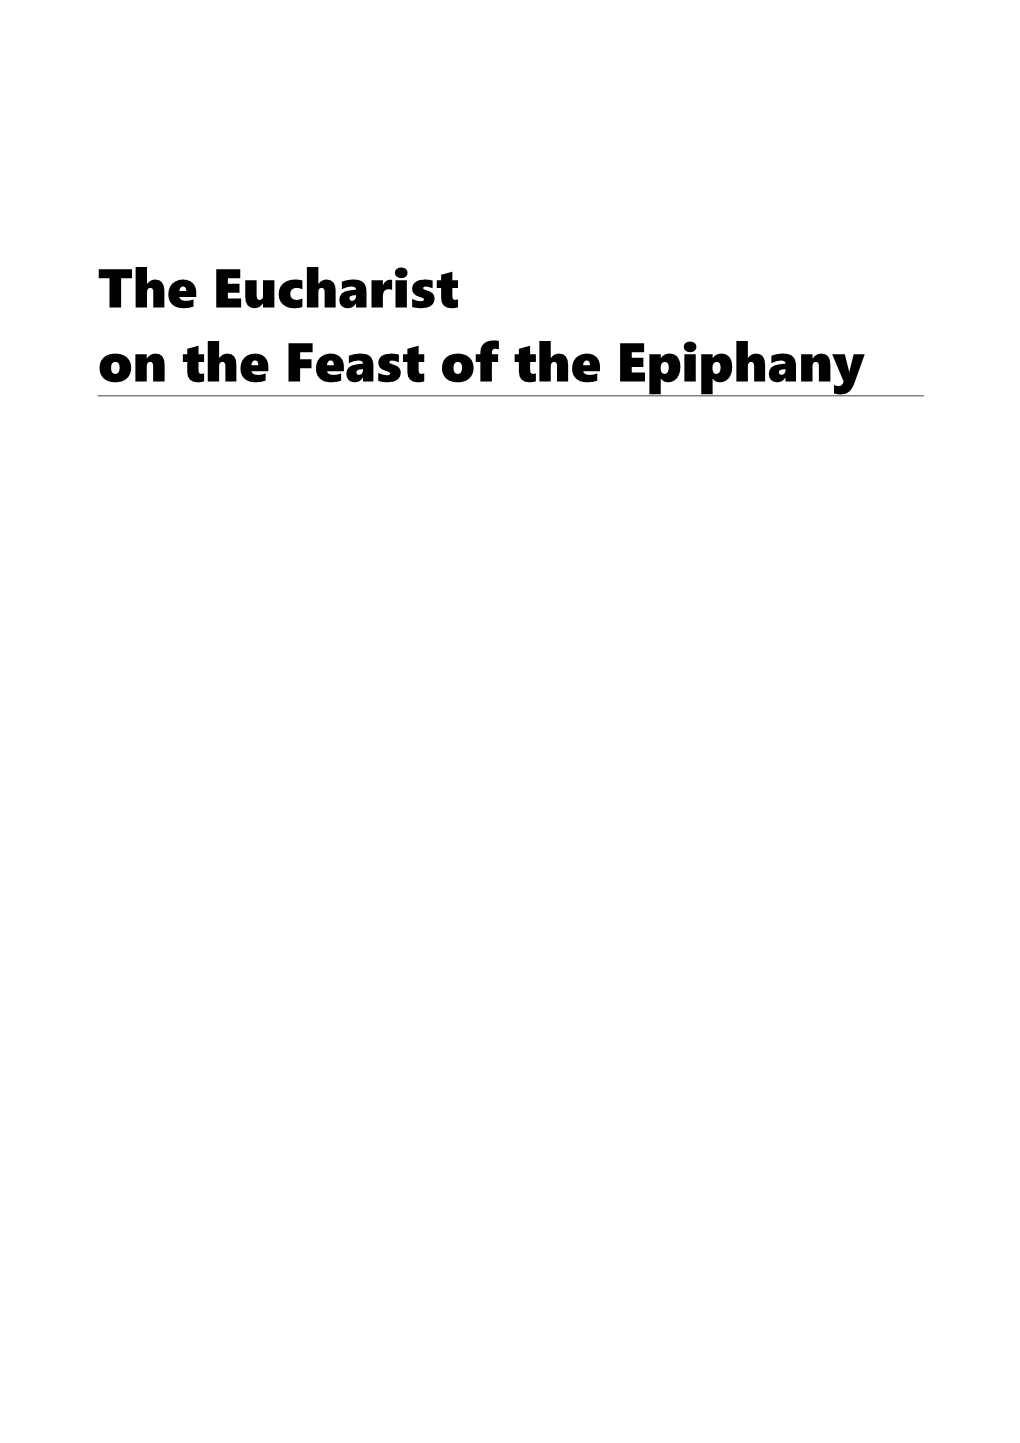 CW1 - the Eucharist on the Sundays of Ordinary Time